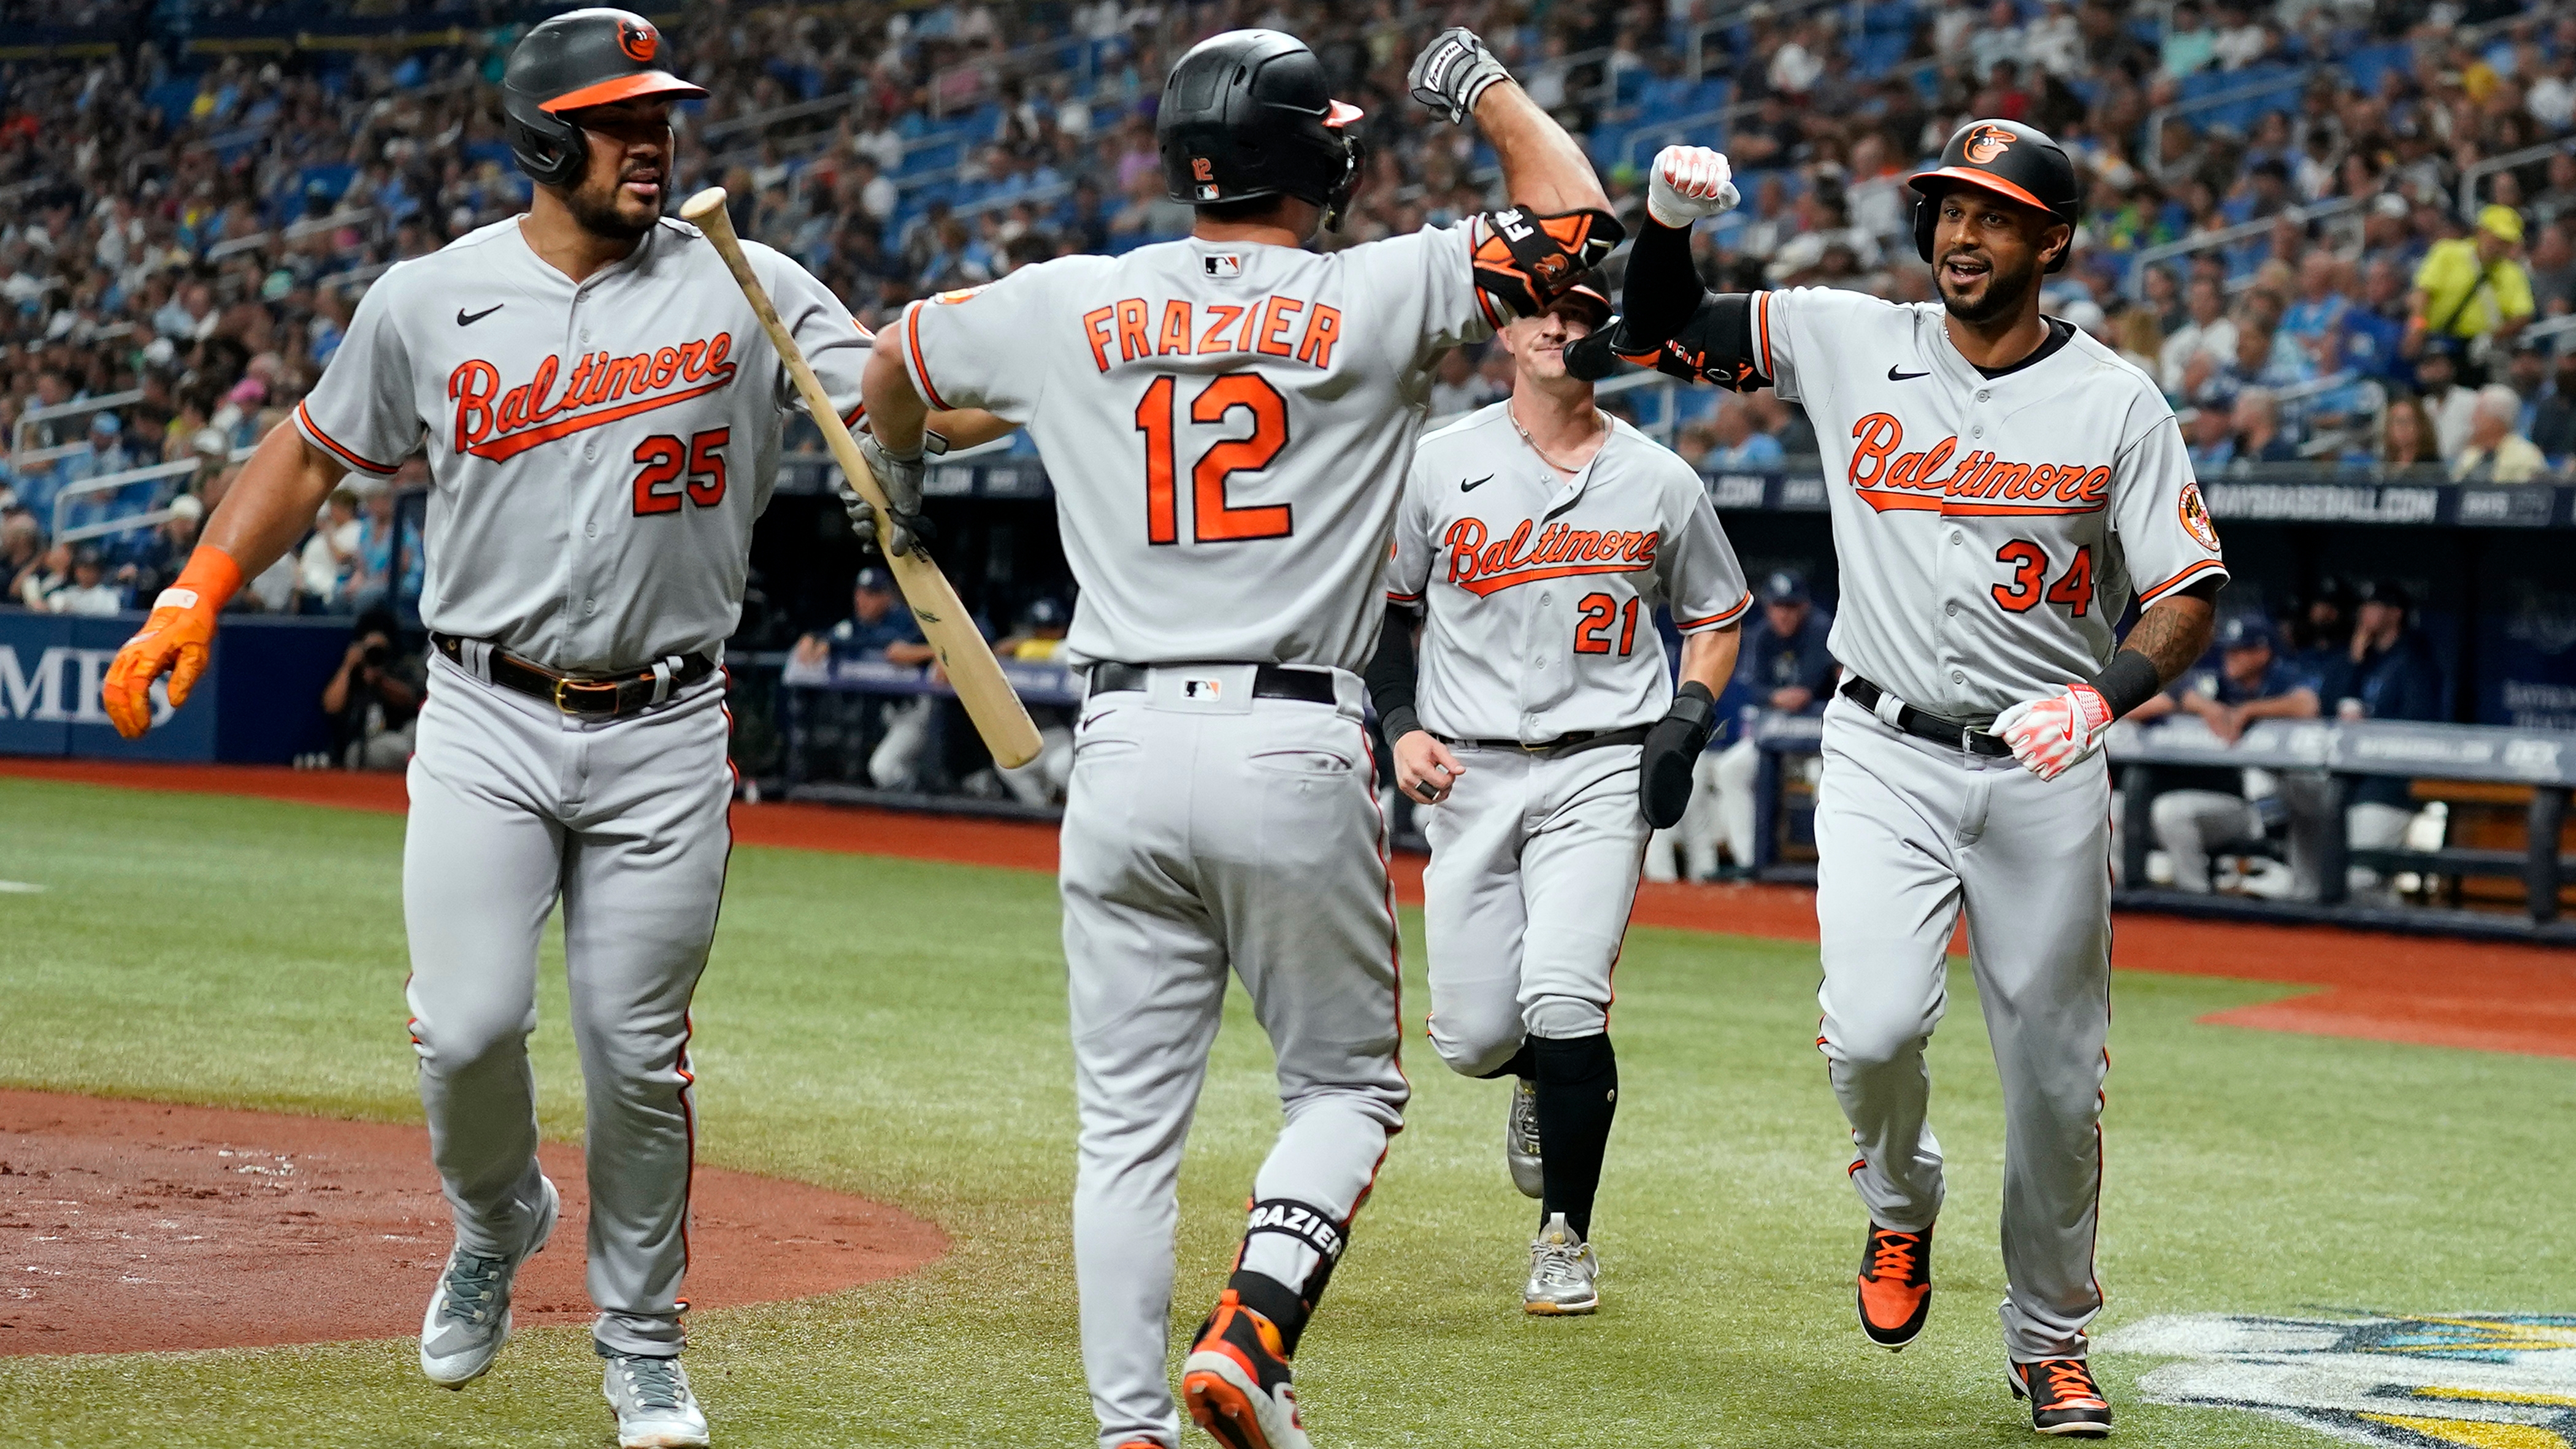 Best Orioles players by uniform number